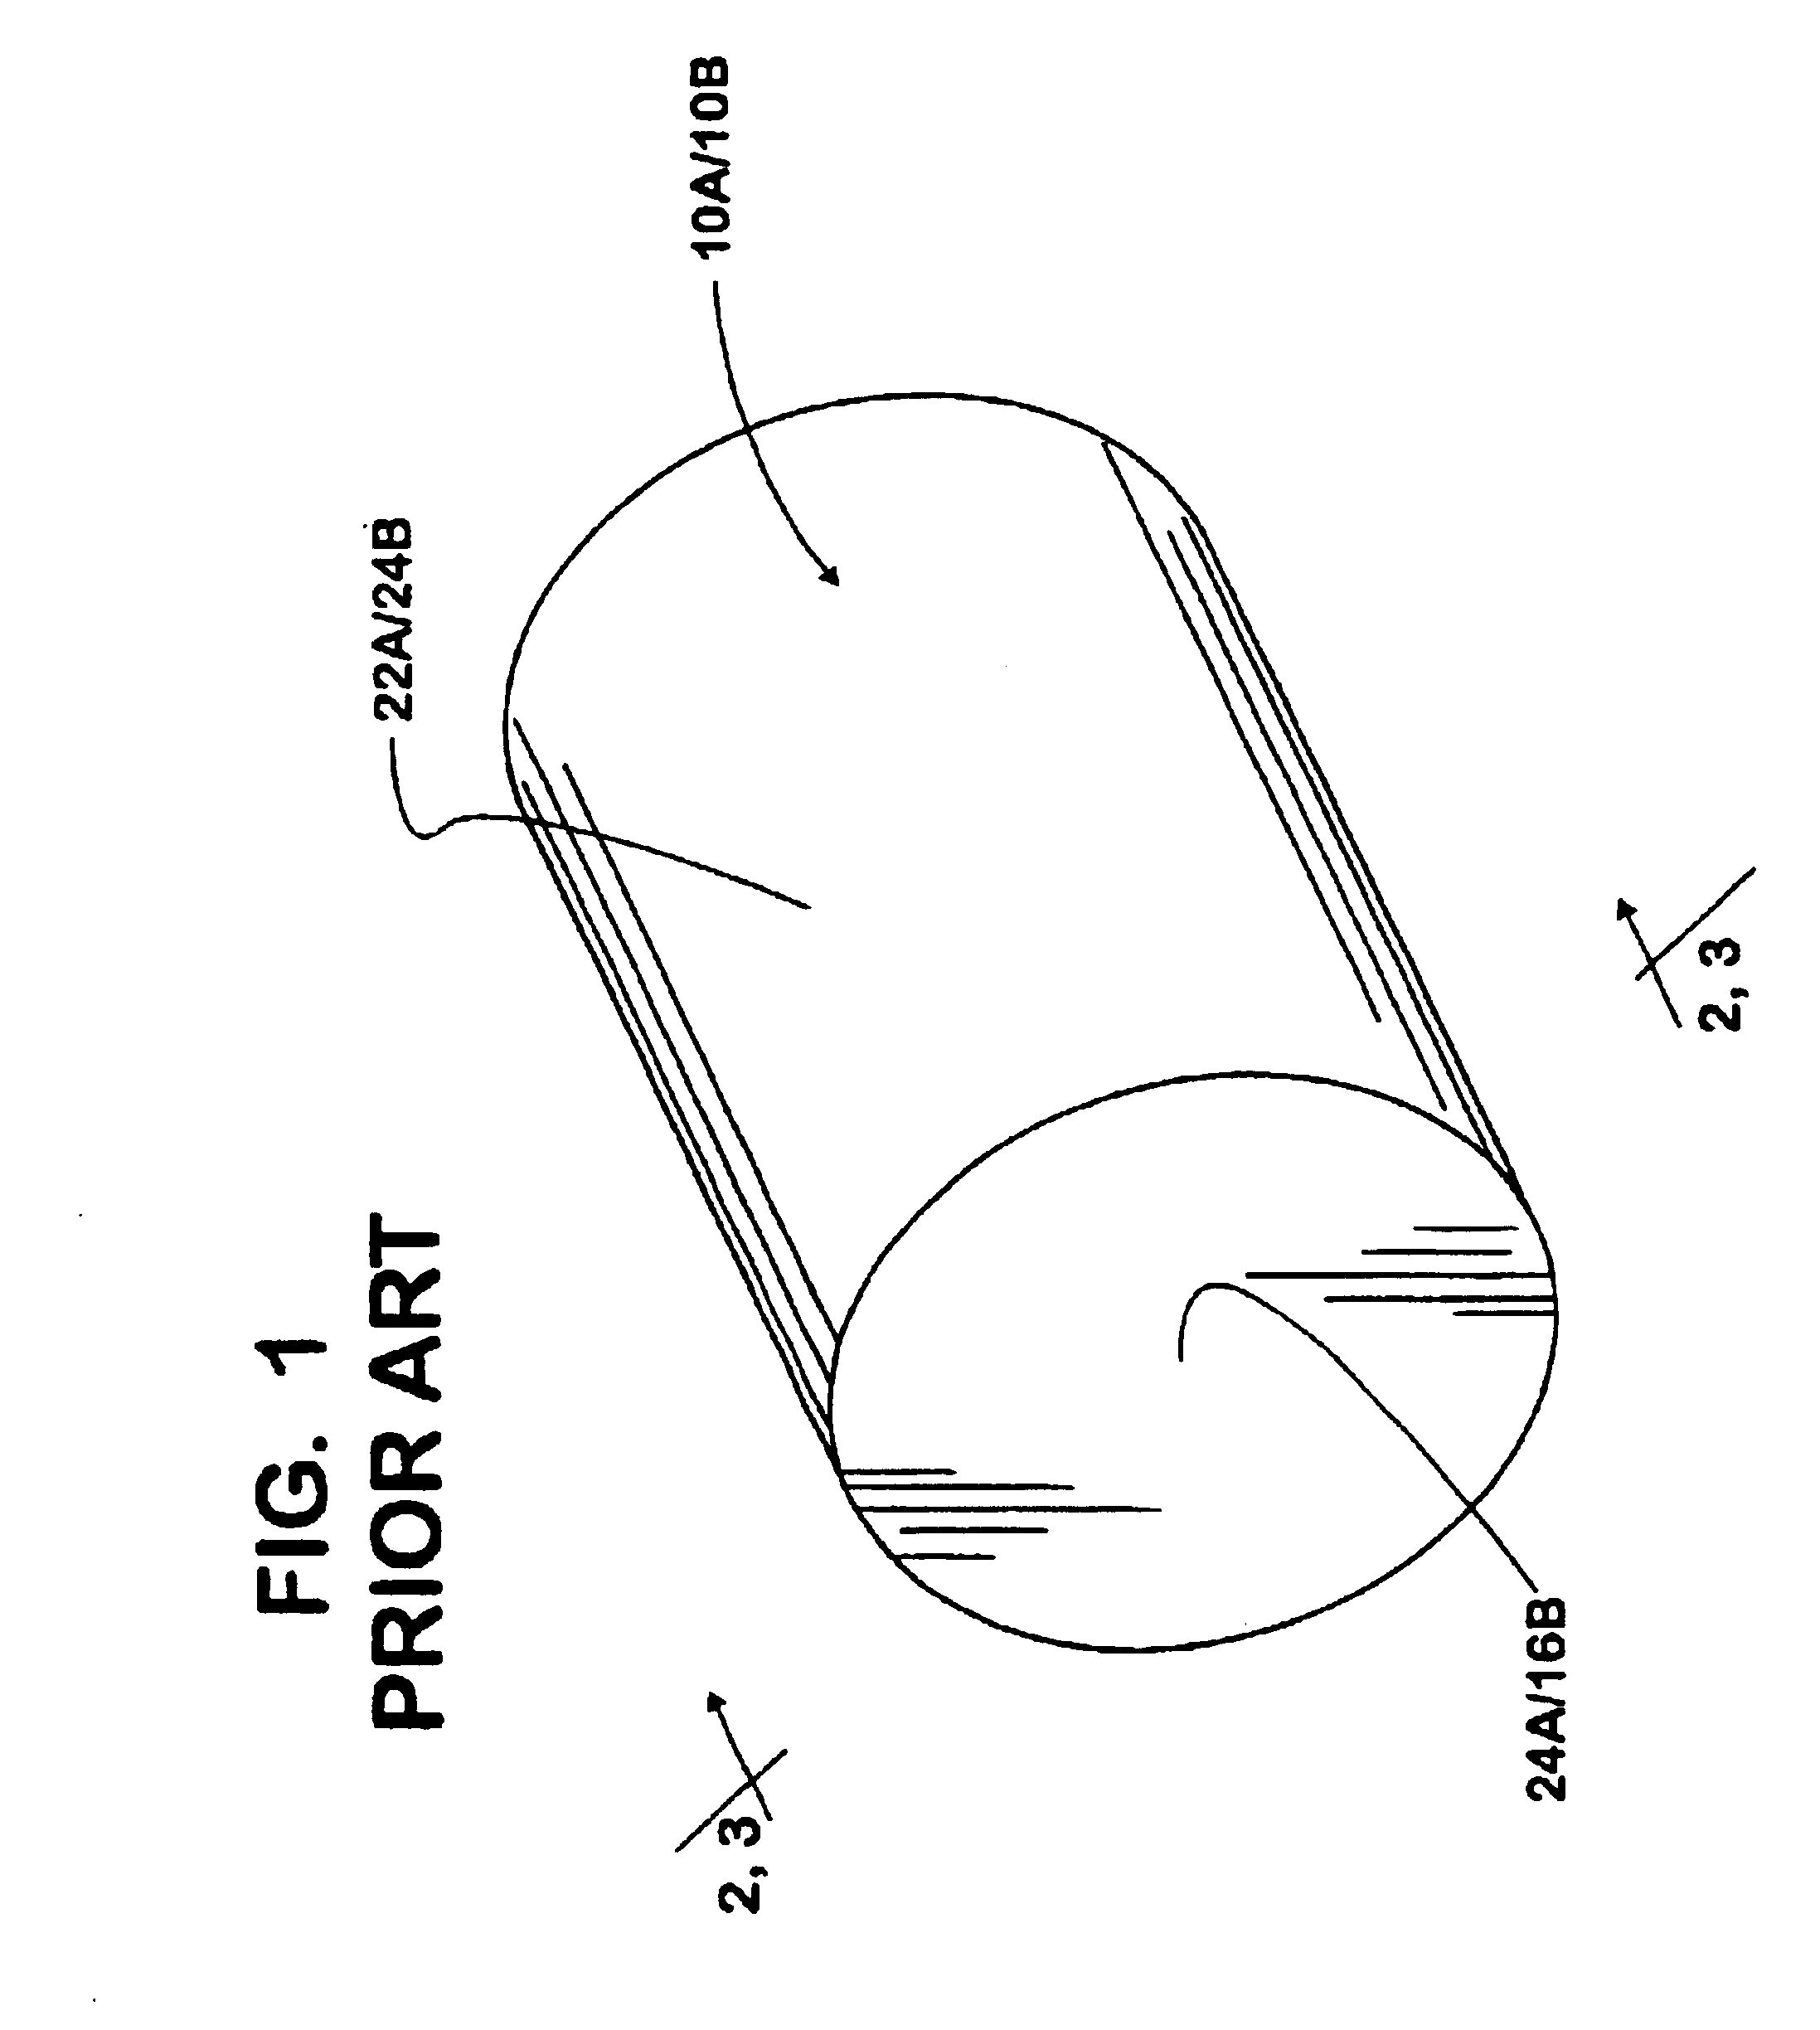 Seamed sleeved blanket and method for making and using same